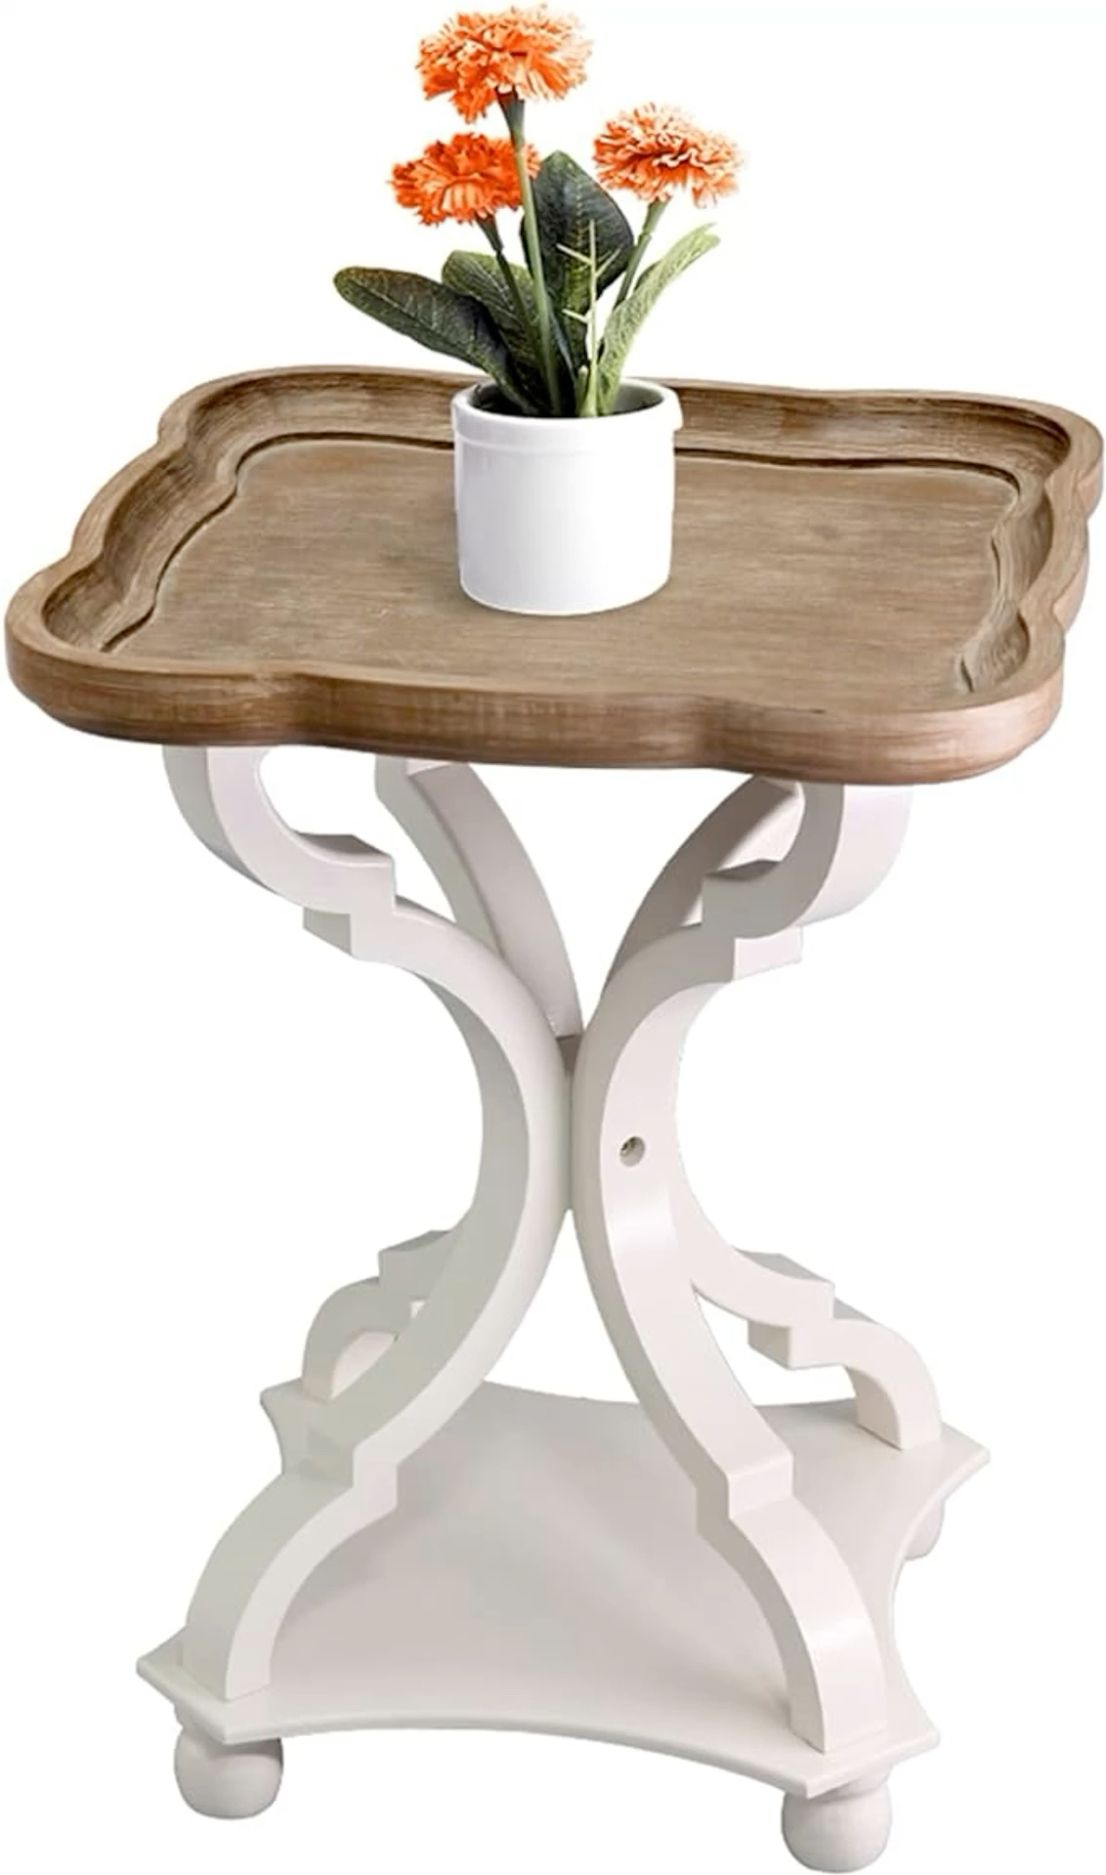 The Beauty of Petite Corner Accent Tables